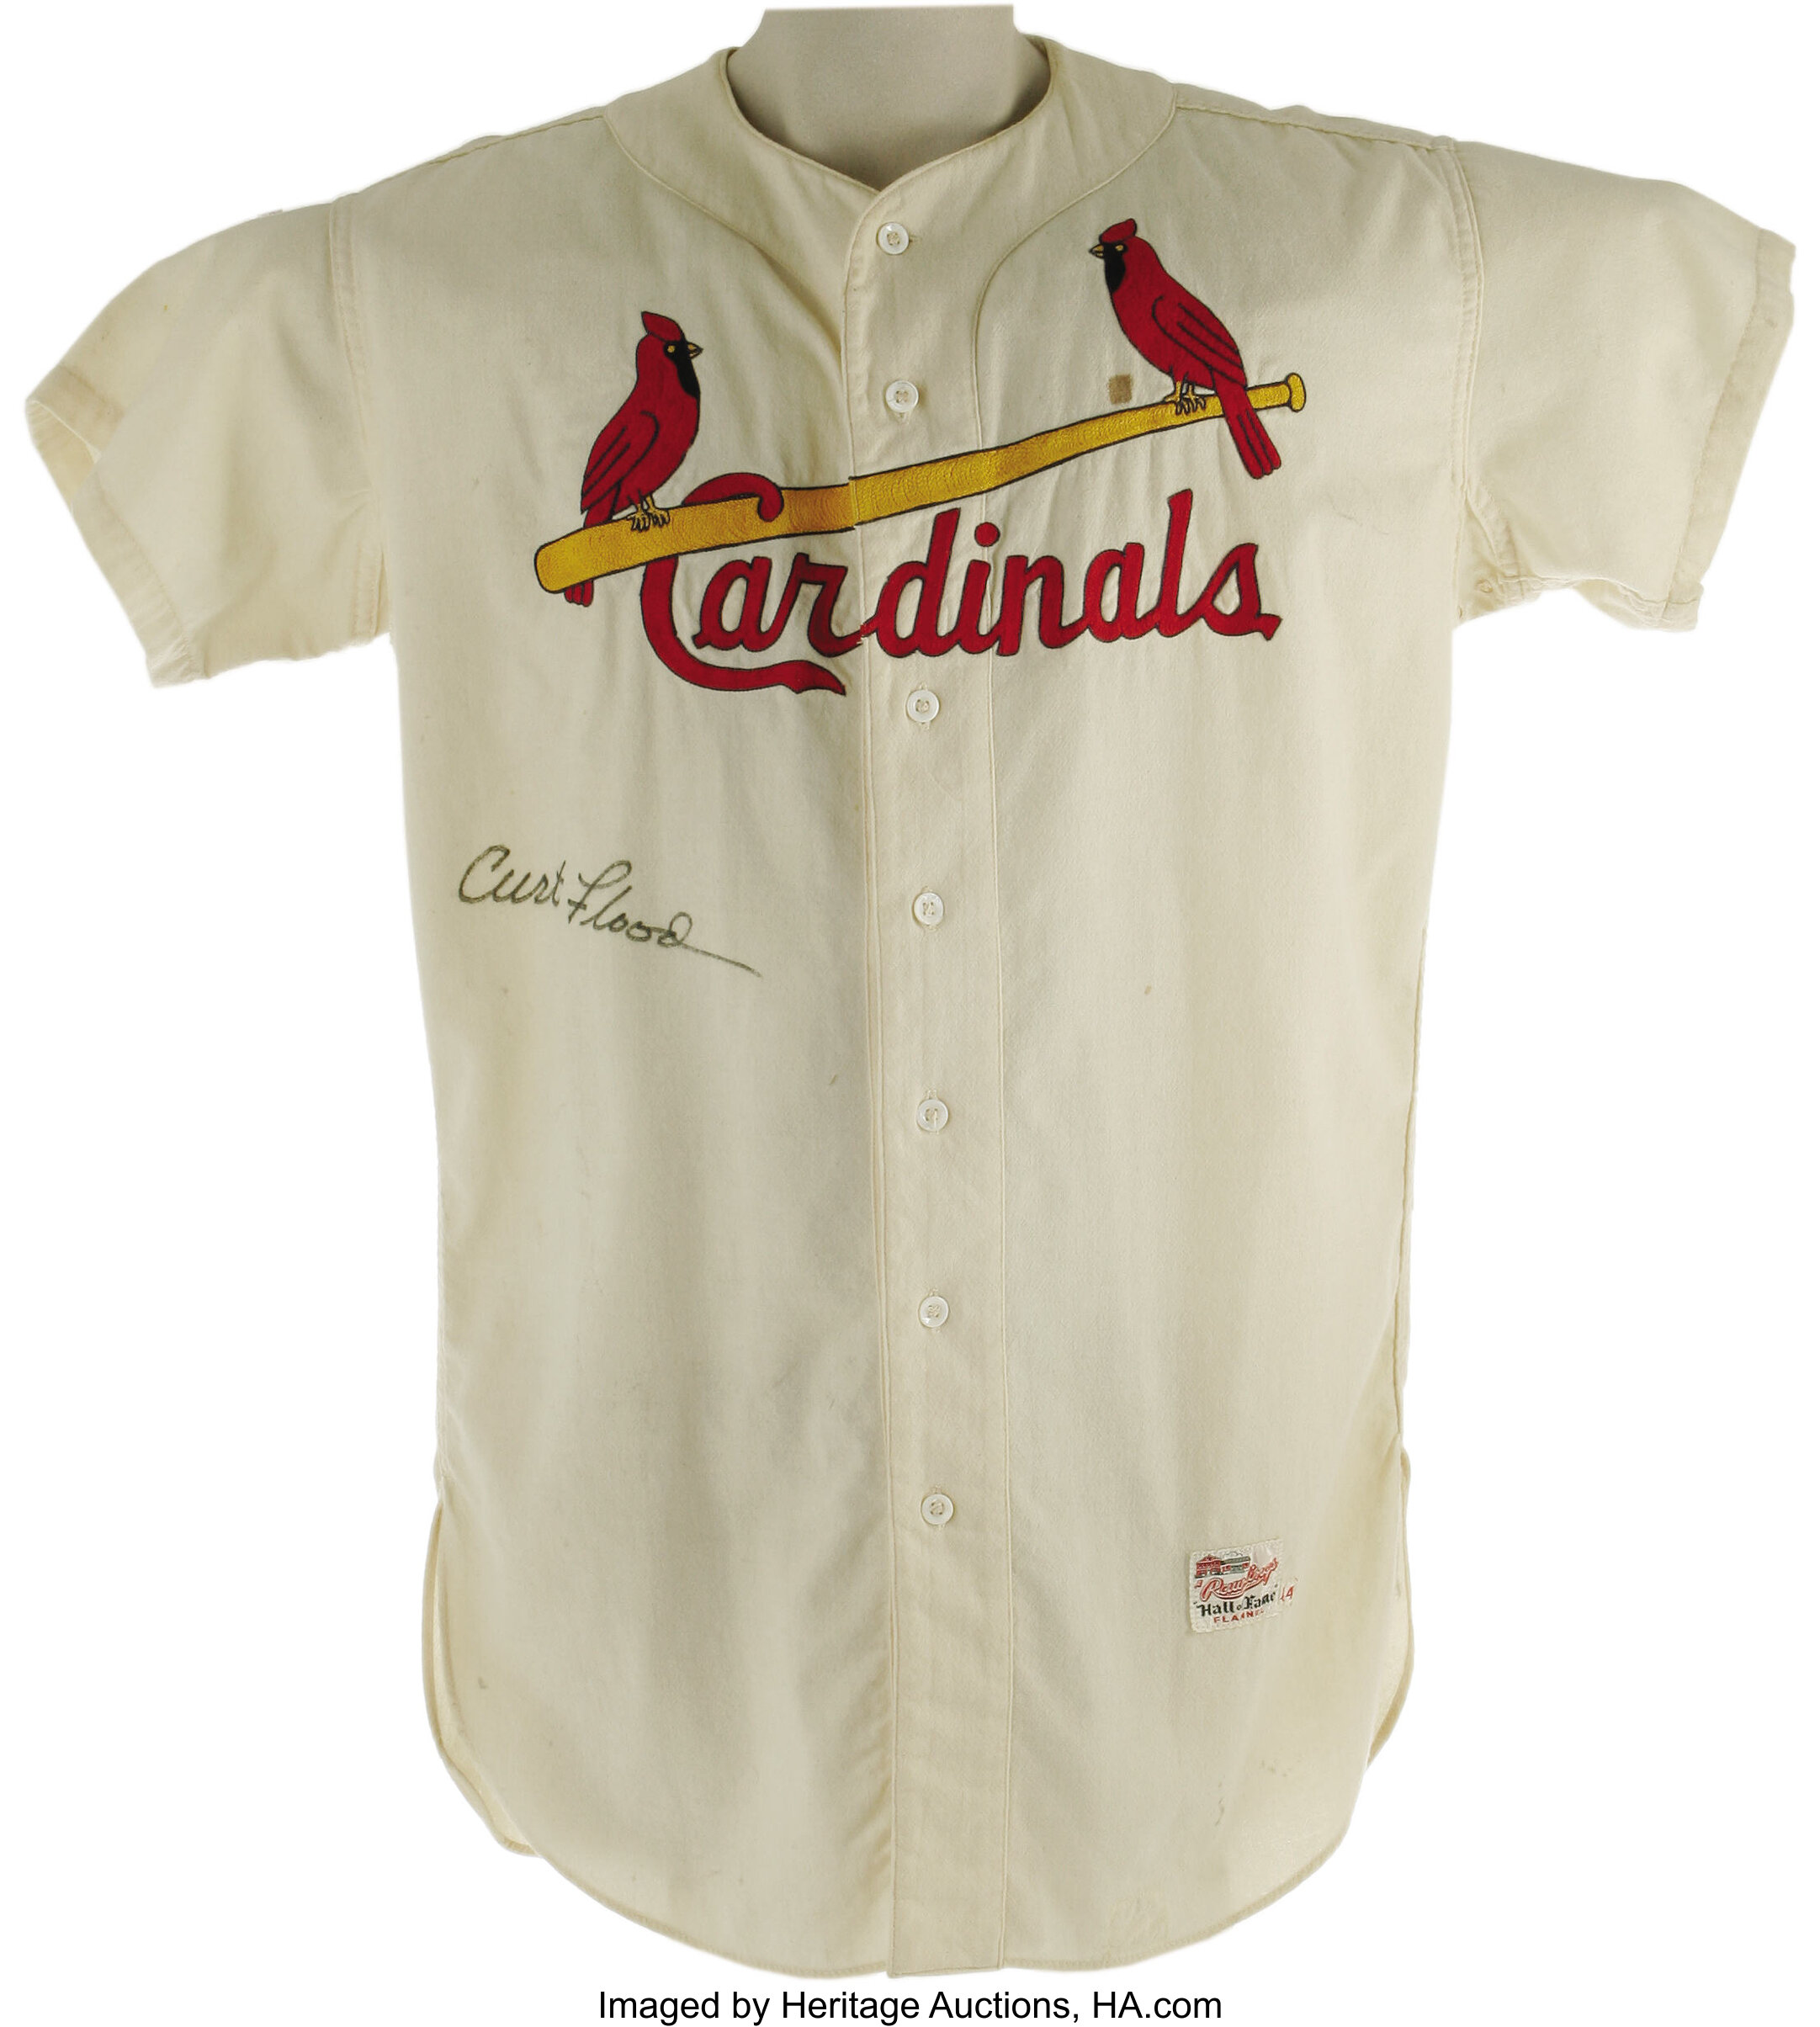 1960's Curt Flood Signed St. Louis Cardinals Jersey. Home white